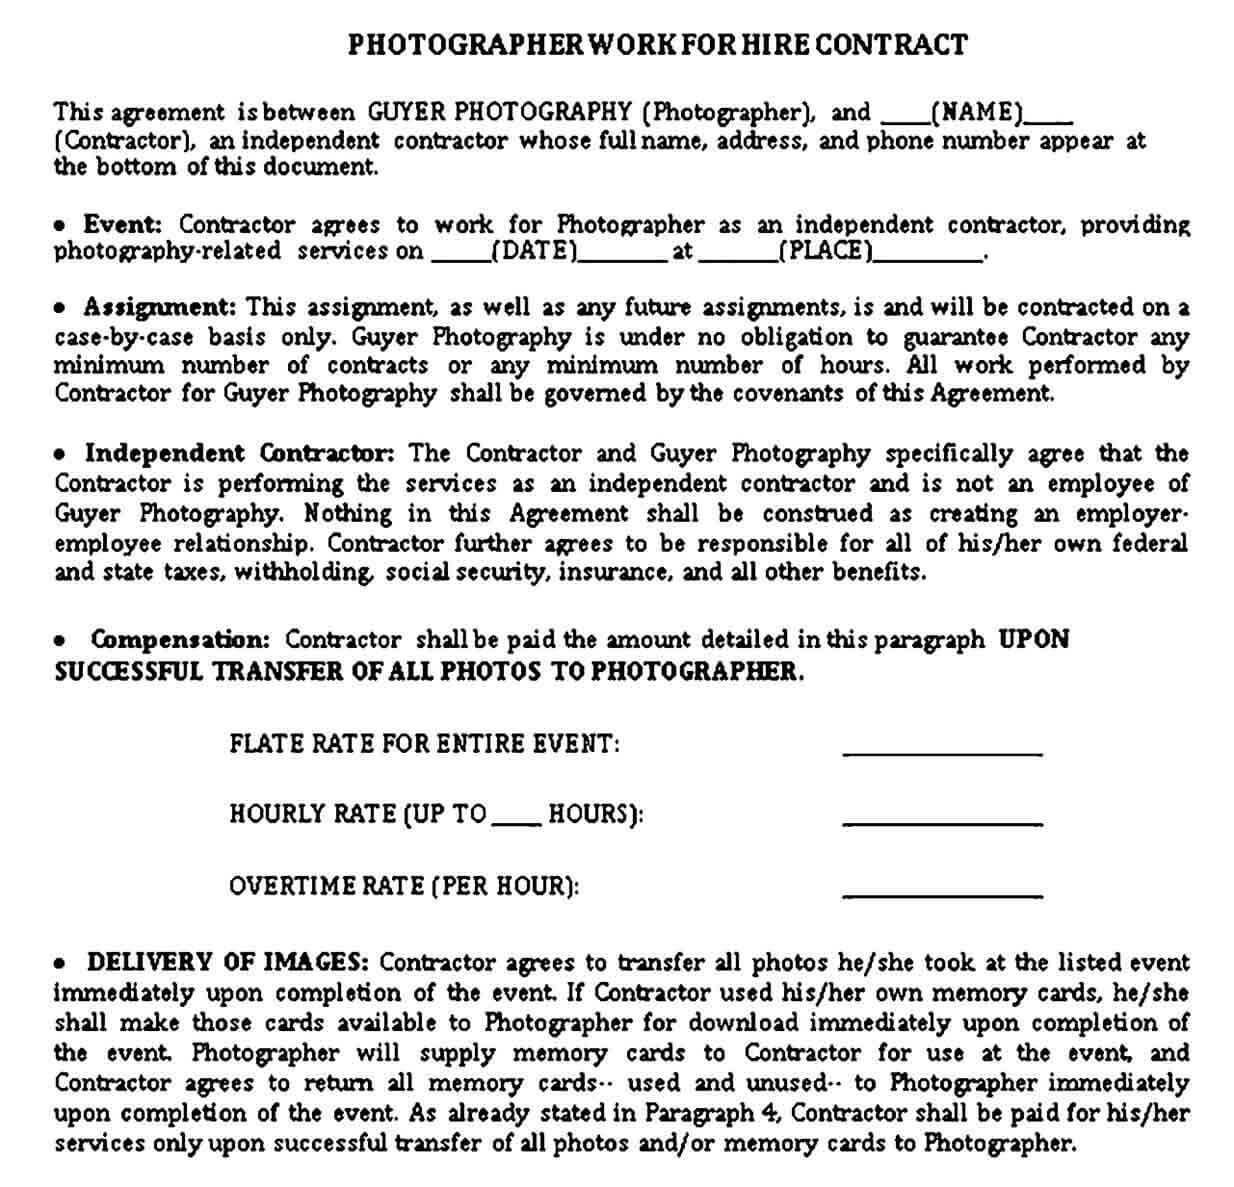 Photographer Work For Hire Agreement